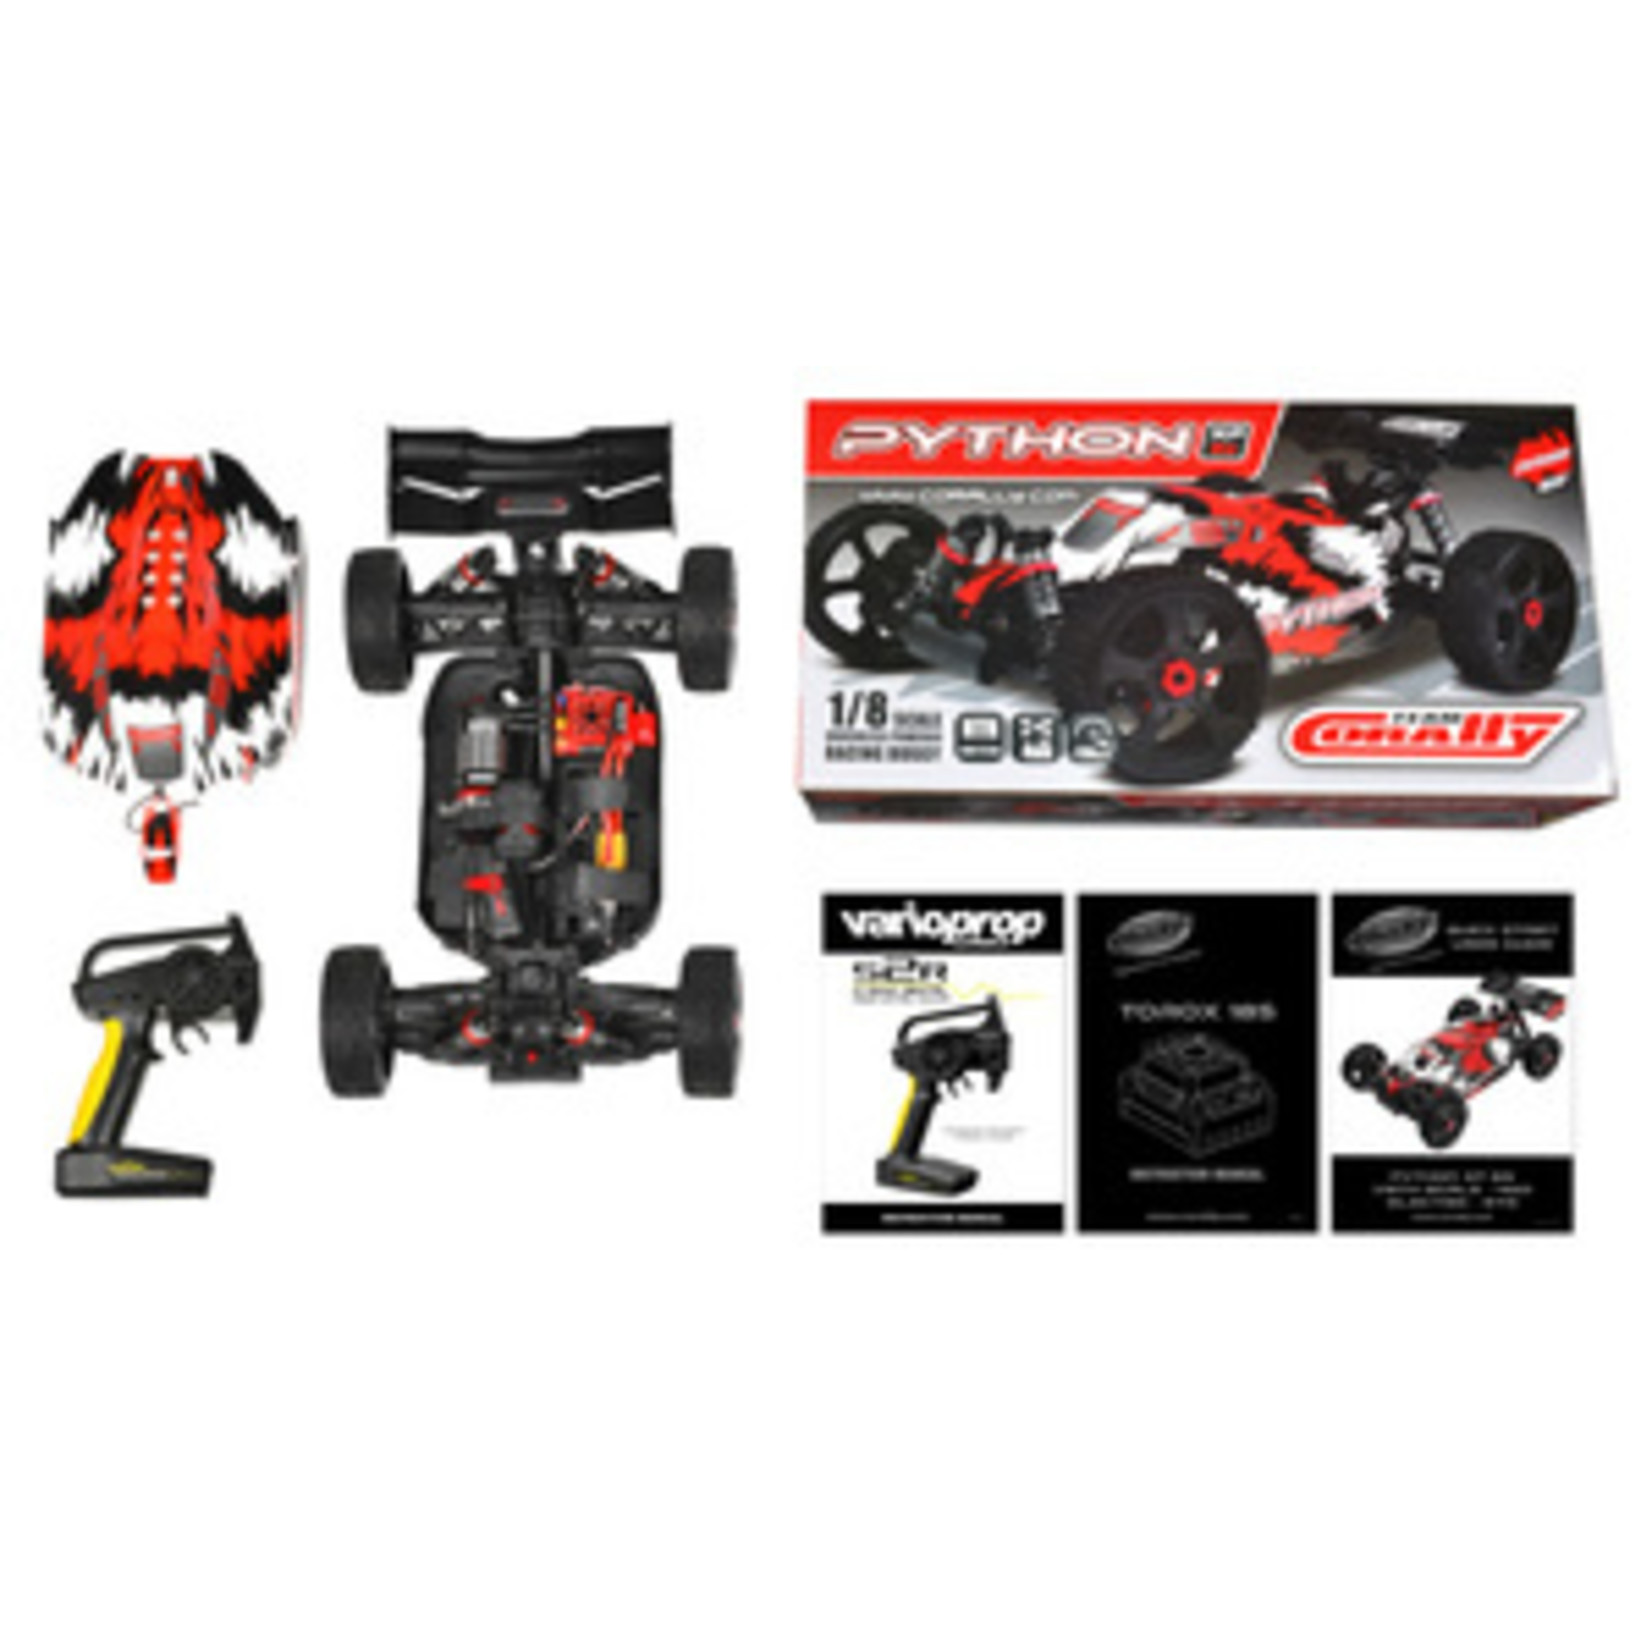 Corally (Team Corally) COR00182 1/8 Python XP 2021 4WD 6S Brushless RTR Buggy (No Battery or Charger)